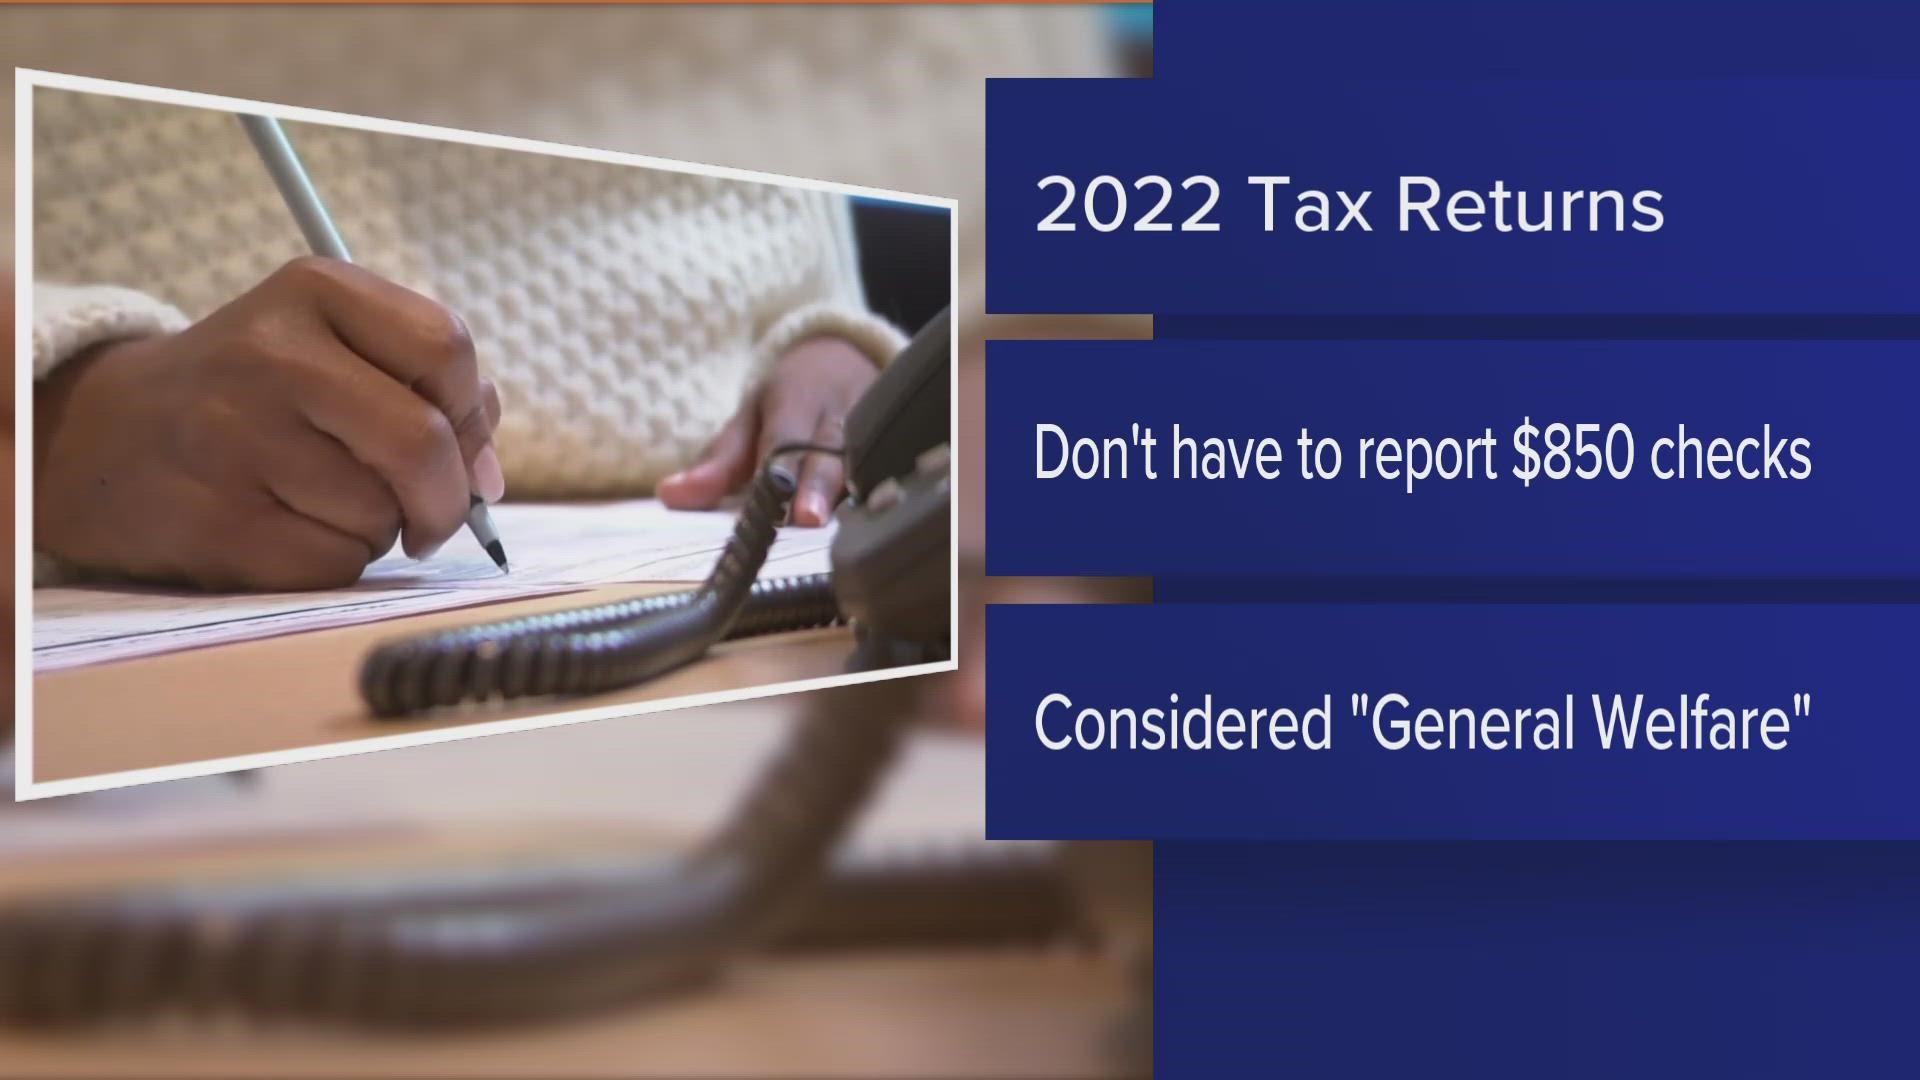 The IRS issued a statement Friday evening that taxpayers in 21 states, including Maine, do not need to report relief payments while filing 2022 taxes.